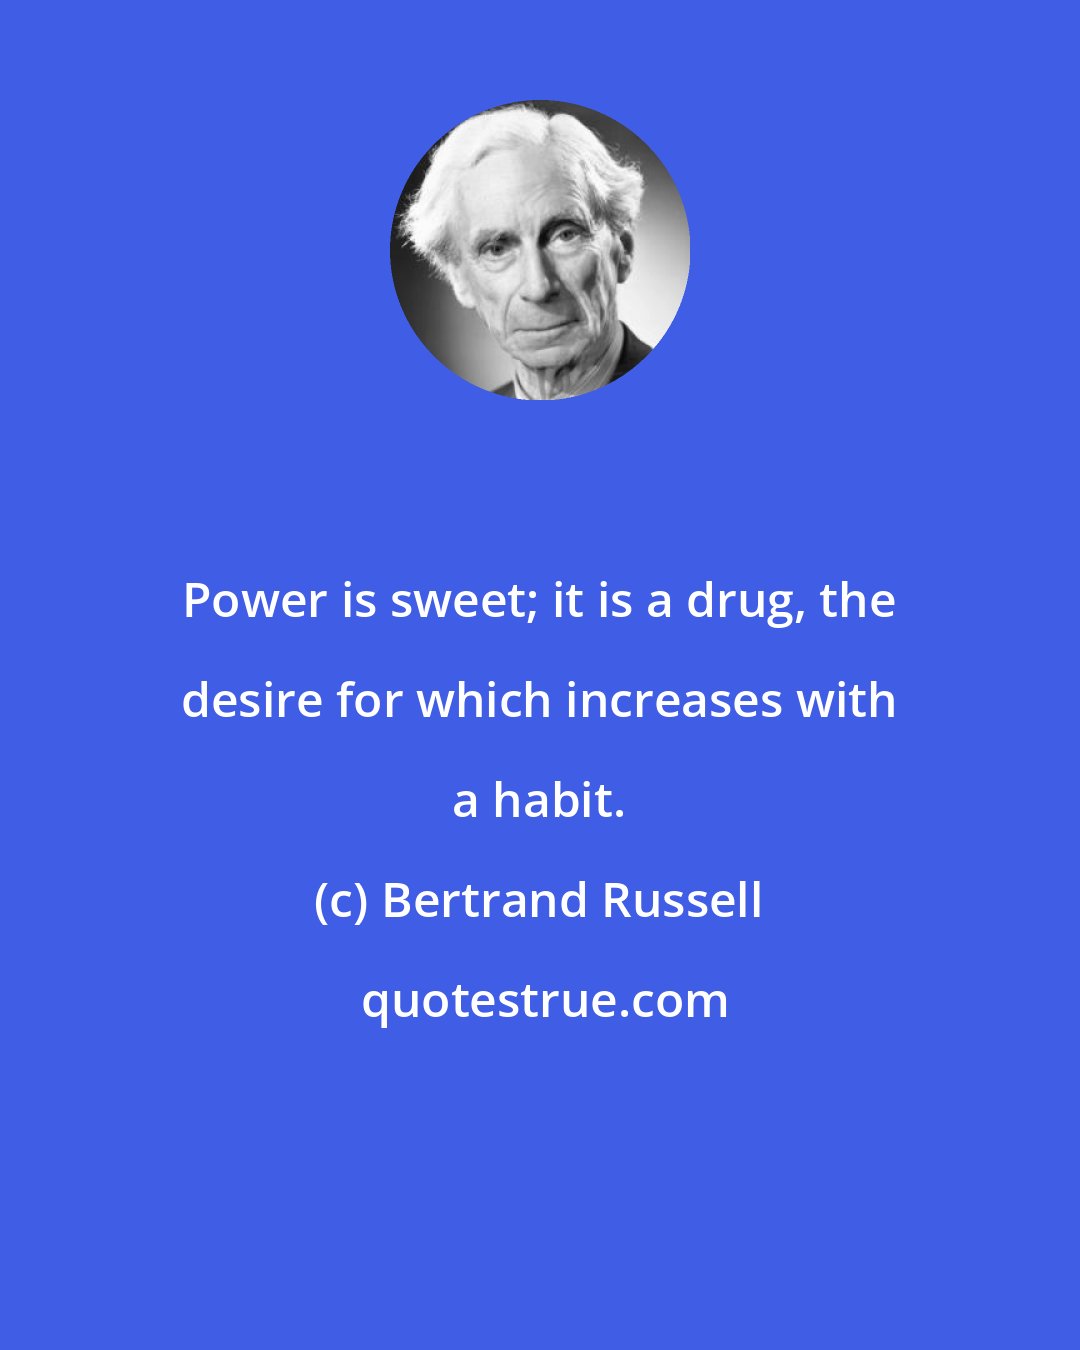 Bertrand Russell: Power is sweet; it is a drug, the desire for which increases with a habit.